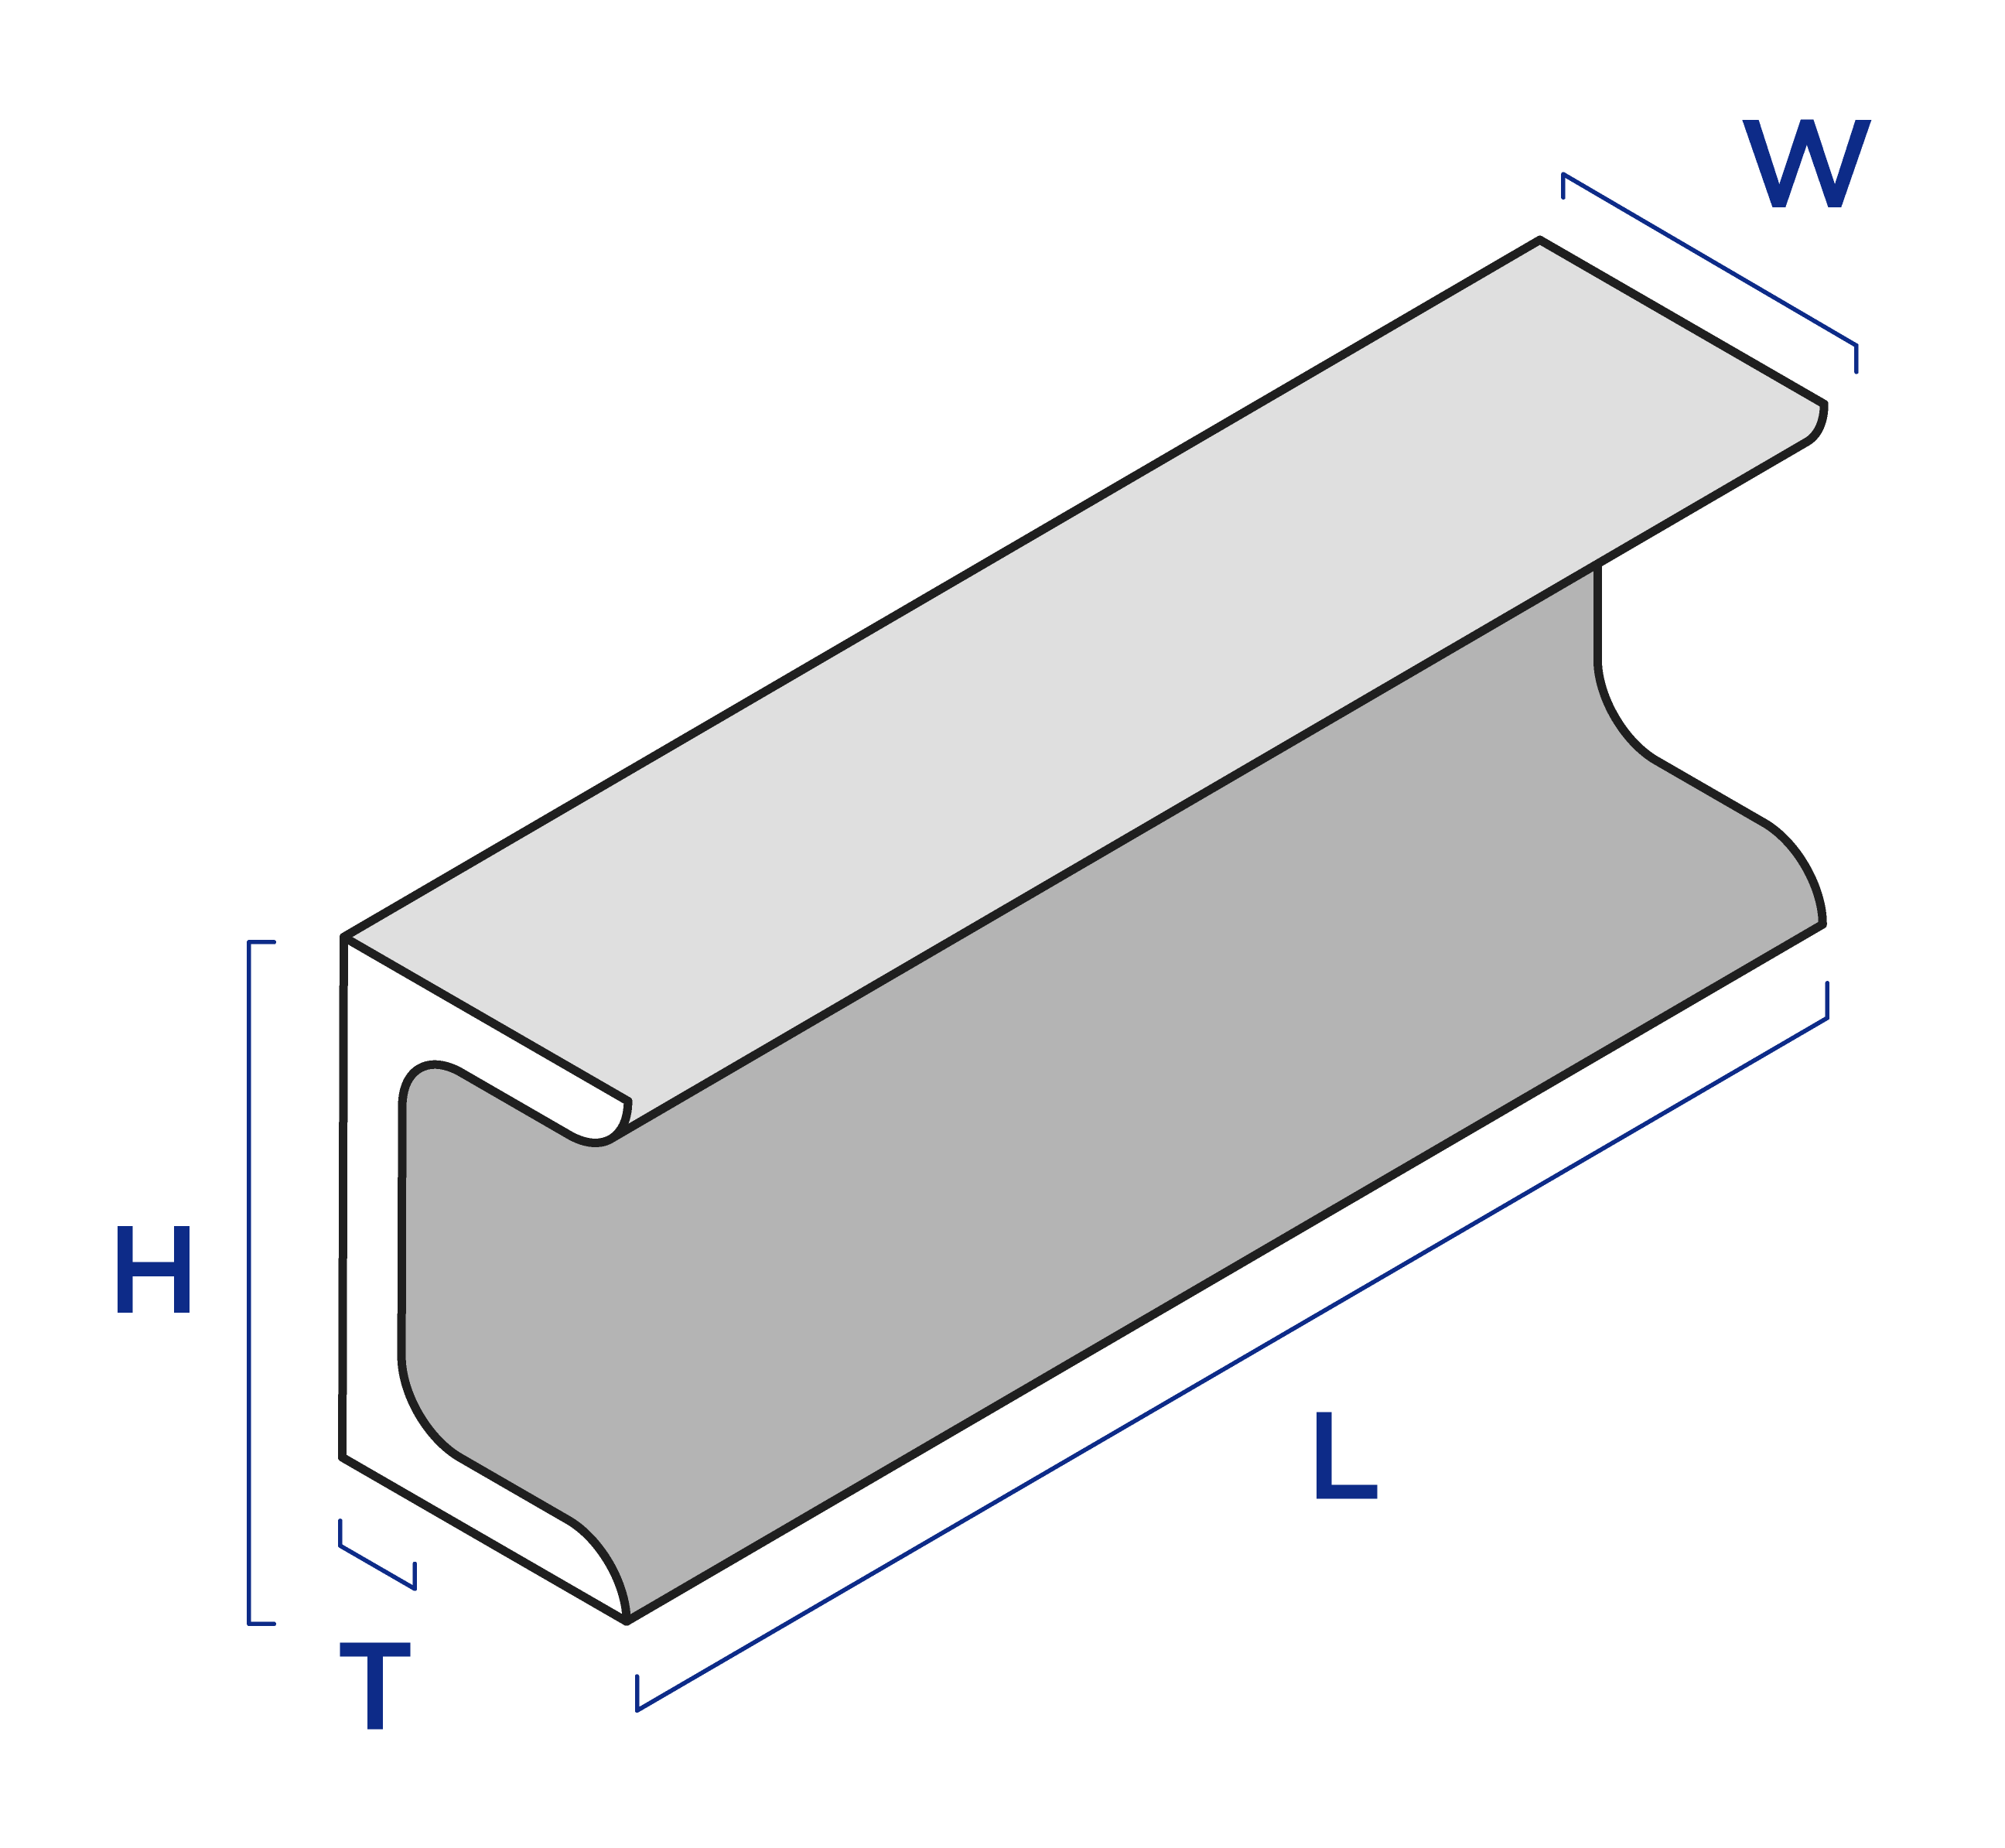 3/16 Inch Wall RMP Hot Roll Steel Structural Angle A36 72 Inch Length Rounded Corners 3 Inch x 3 Inch Leg Length 